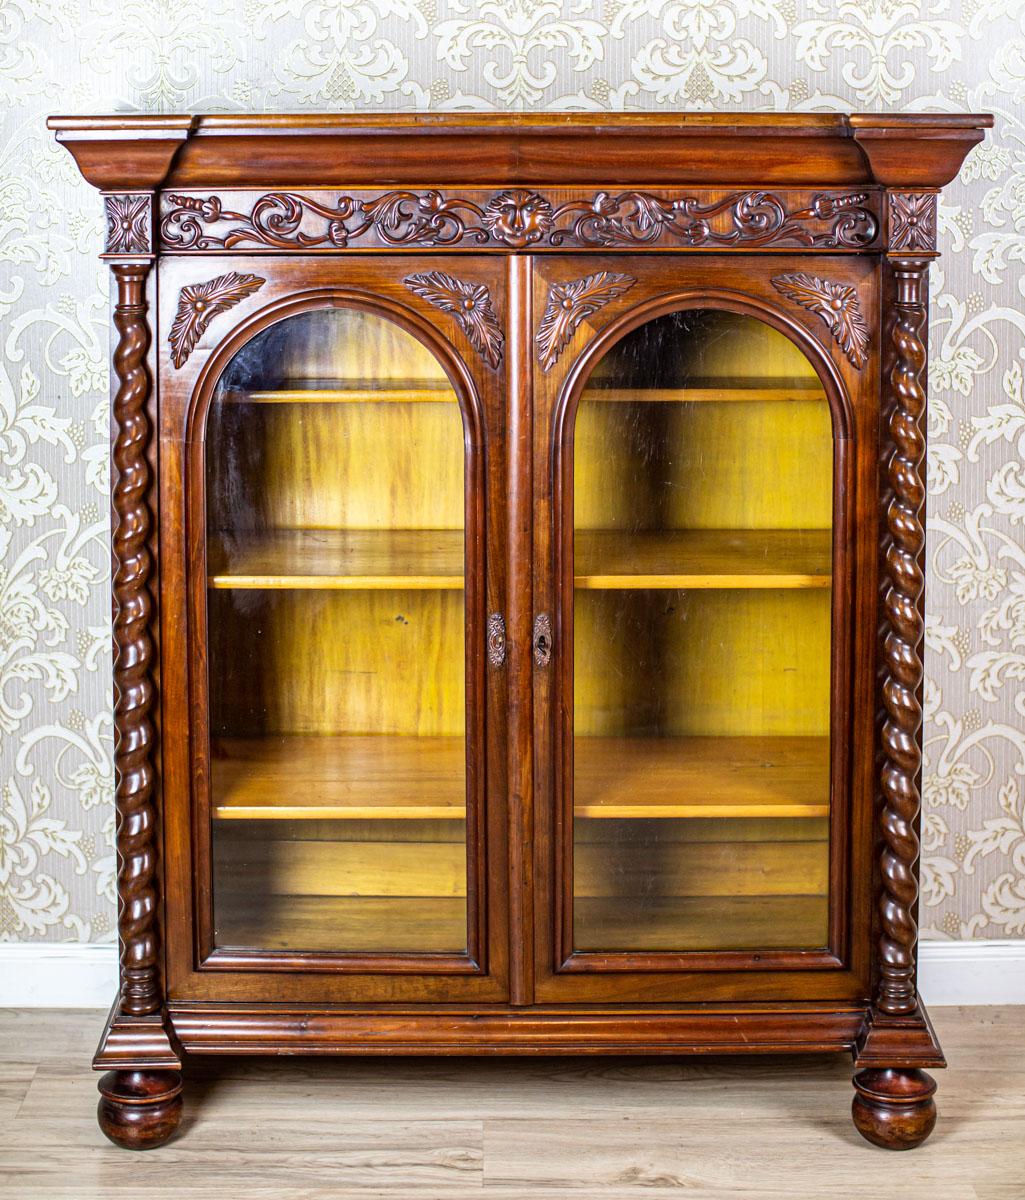 19th-Century French Bookcase-Showcase in Brown

We present you a two-leaf piece of furniture finished with an advanced cornice.
The whole is from Q4 of the 19th century.
The leaves are glazed, closed by arches, and flanked with spirally turned